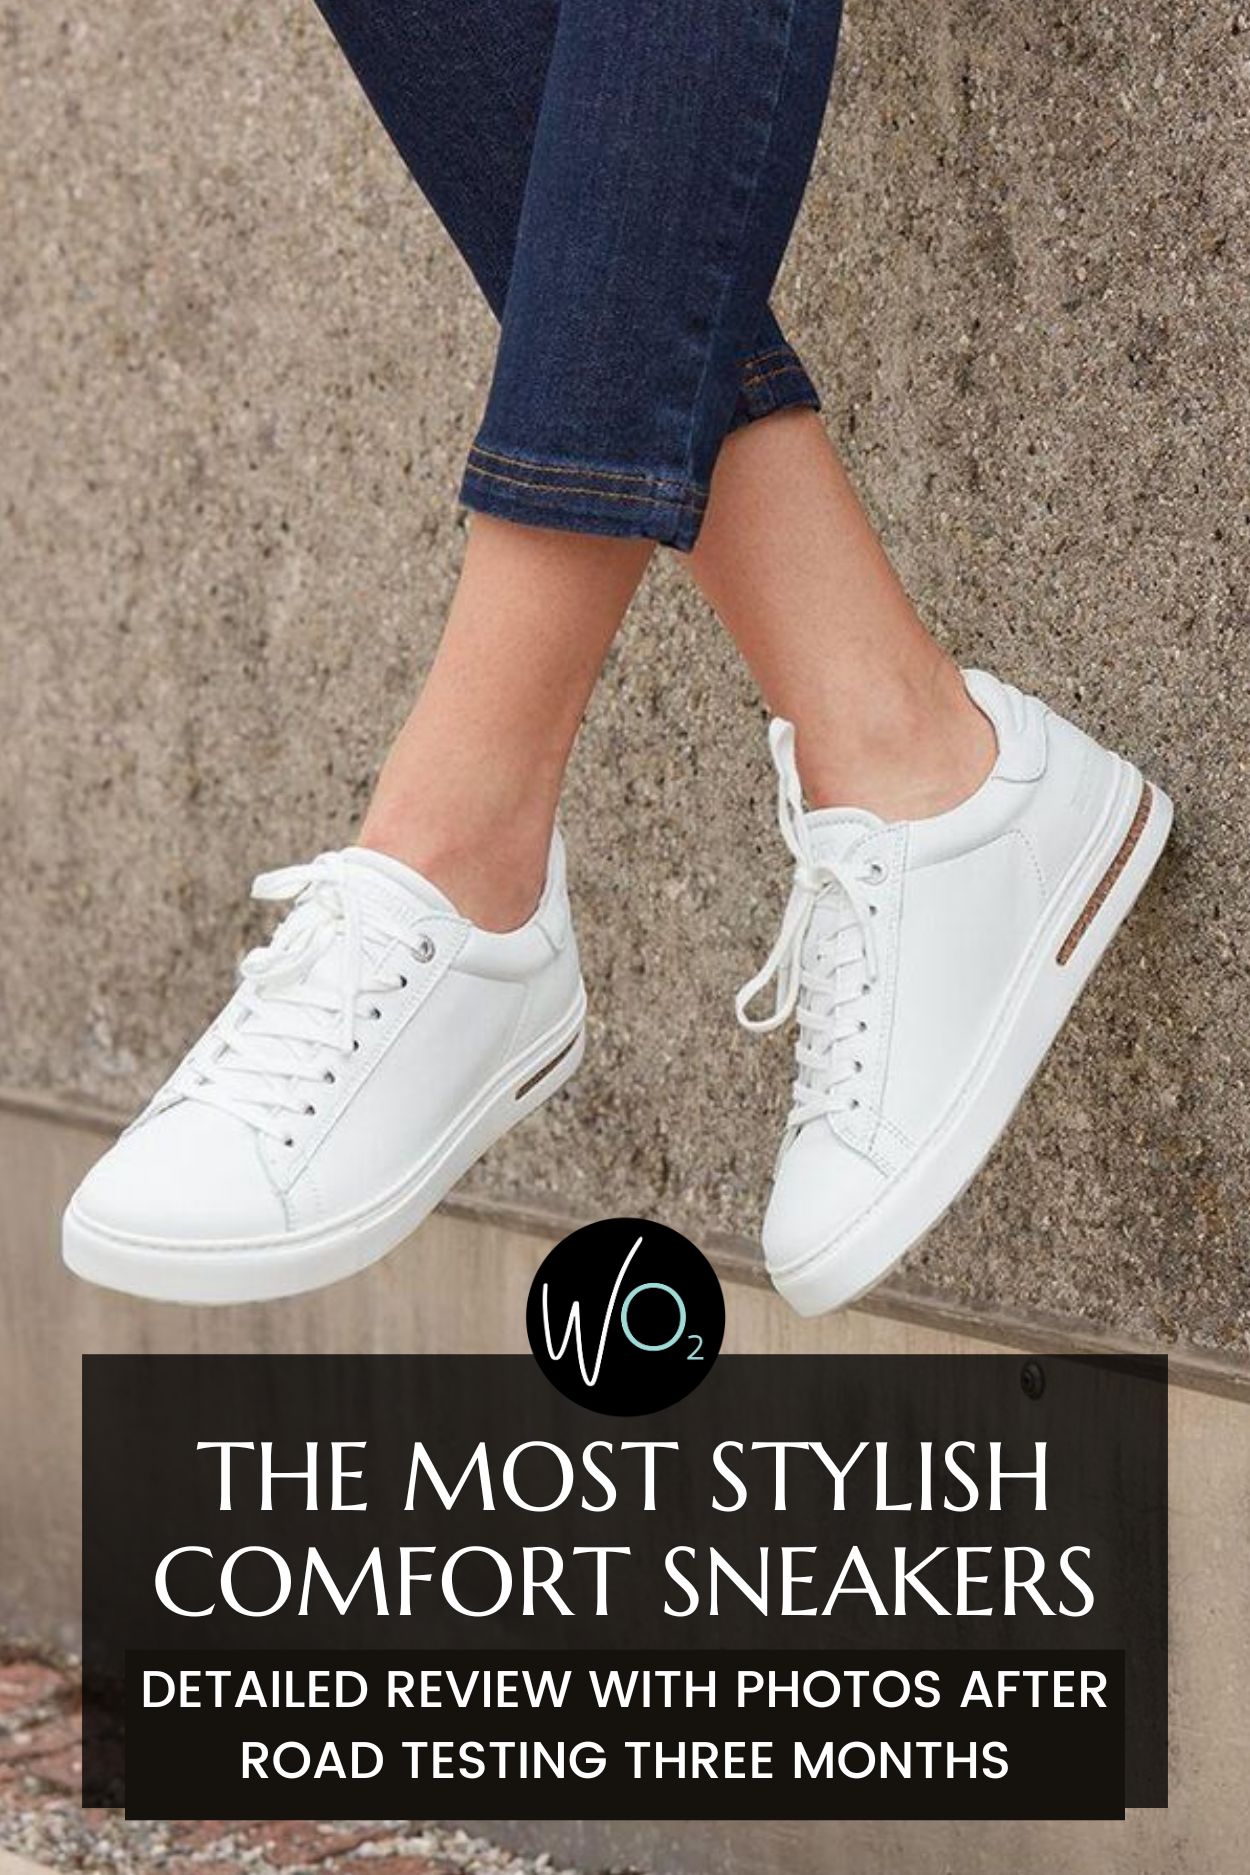 Shop Shoe Paint For Sneakers White Permanent with great discounts